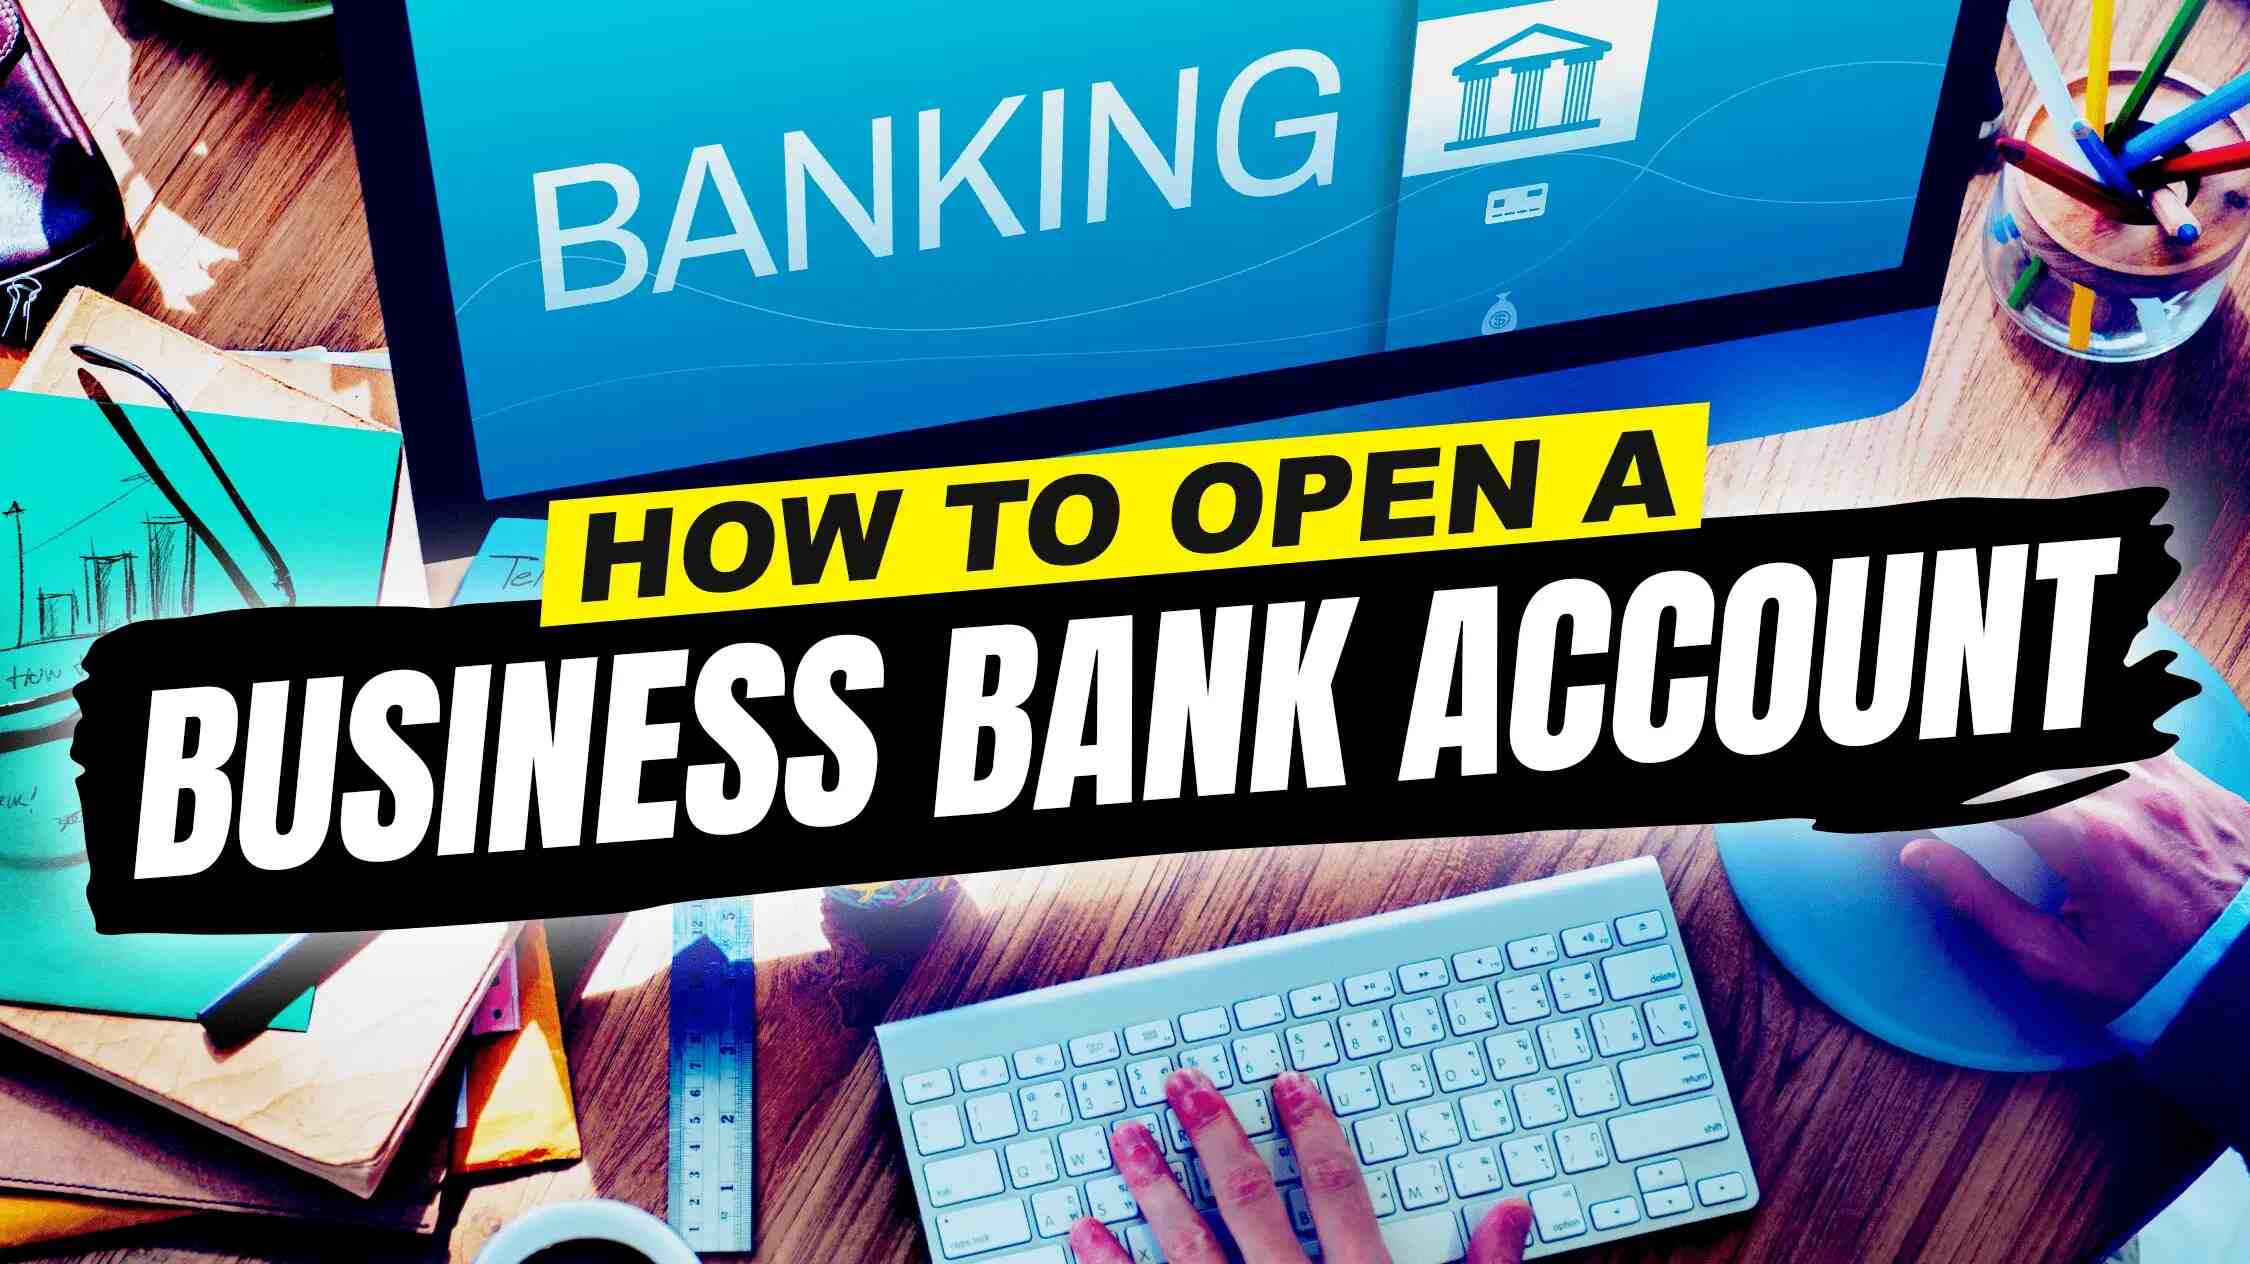 How to Open a Business Bank Account In 5 Easy Steps